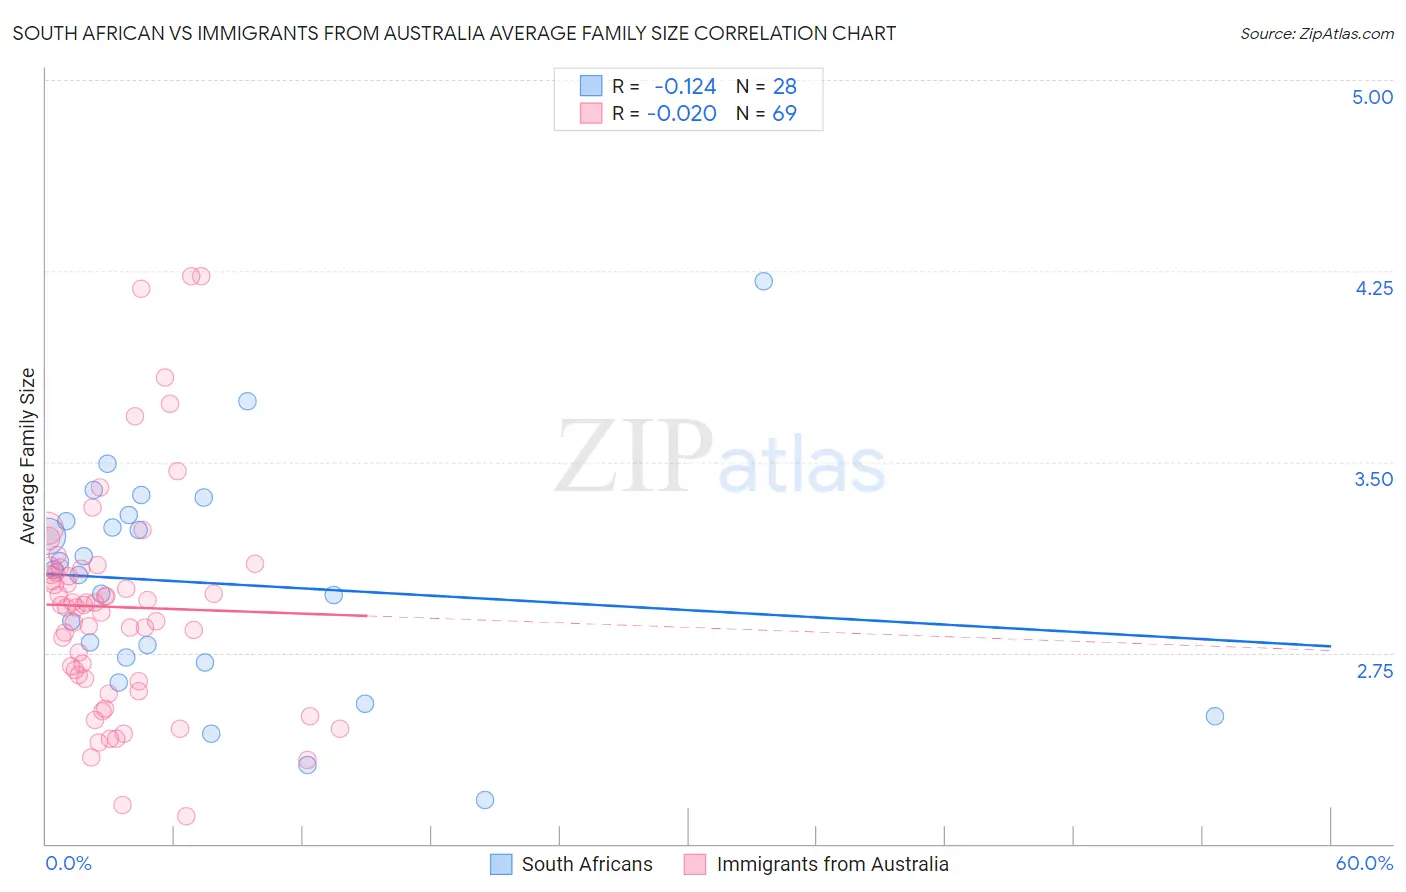 South African vs Immigrants from Australia Average Family Size